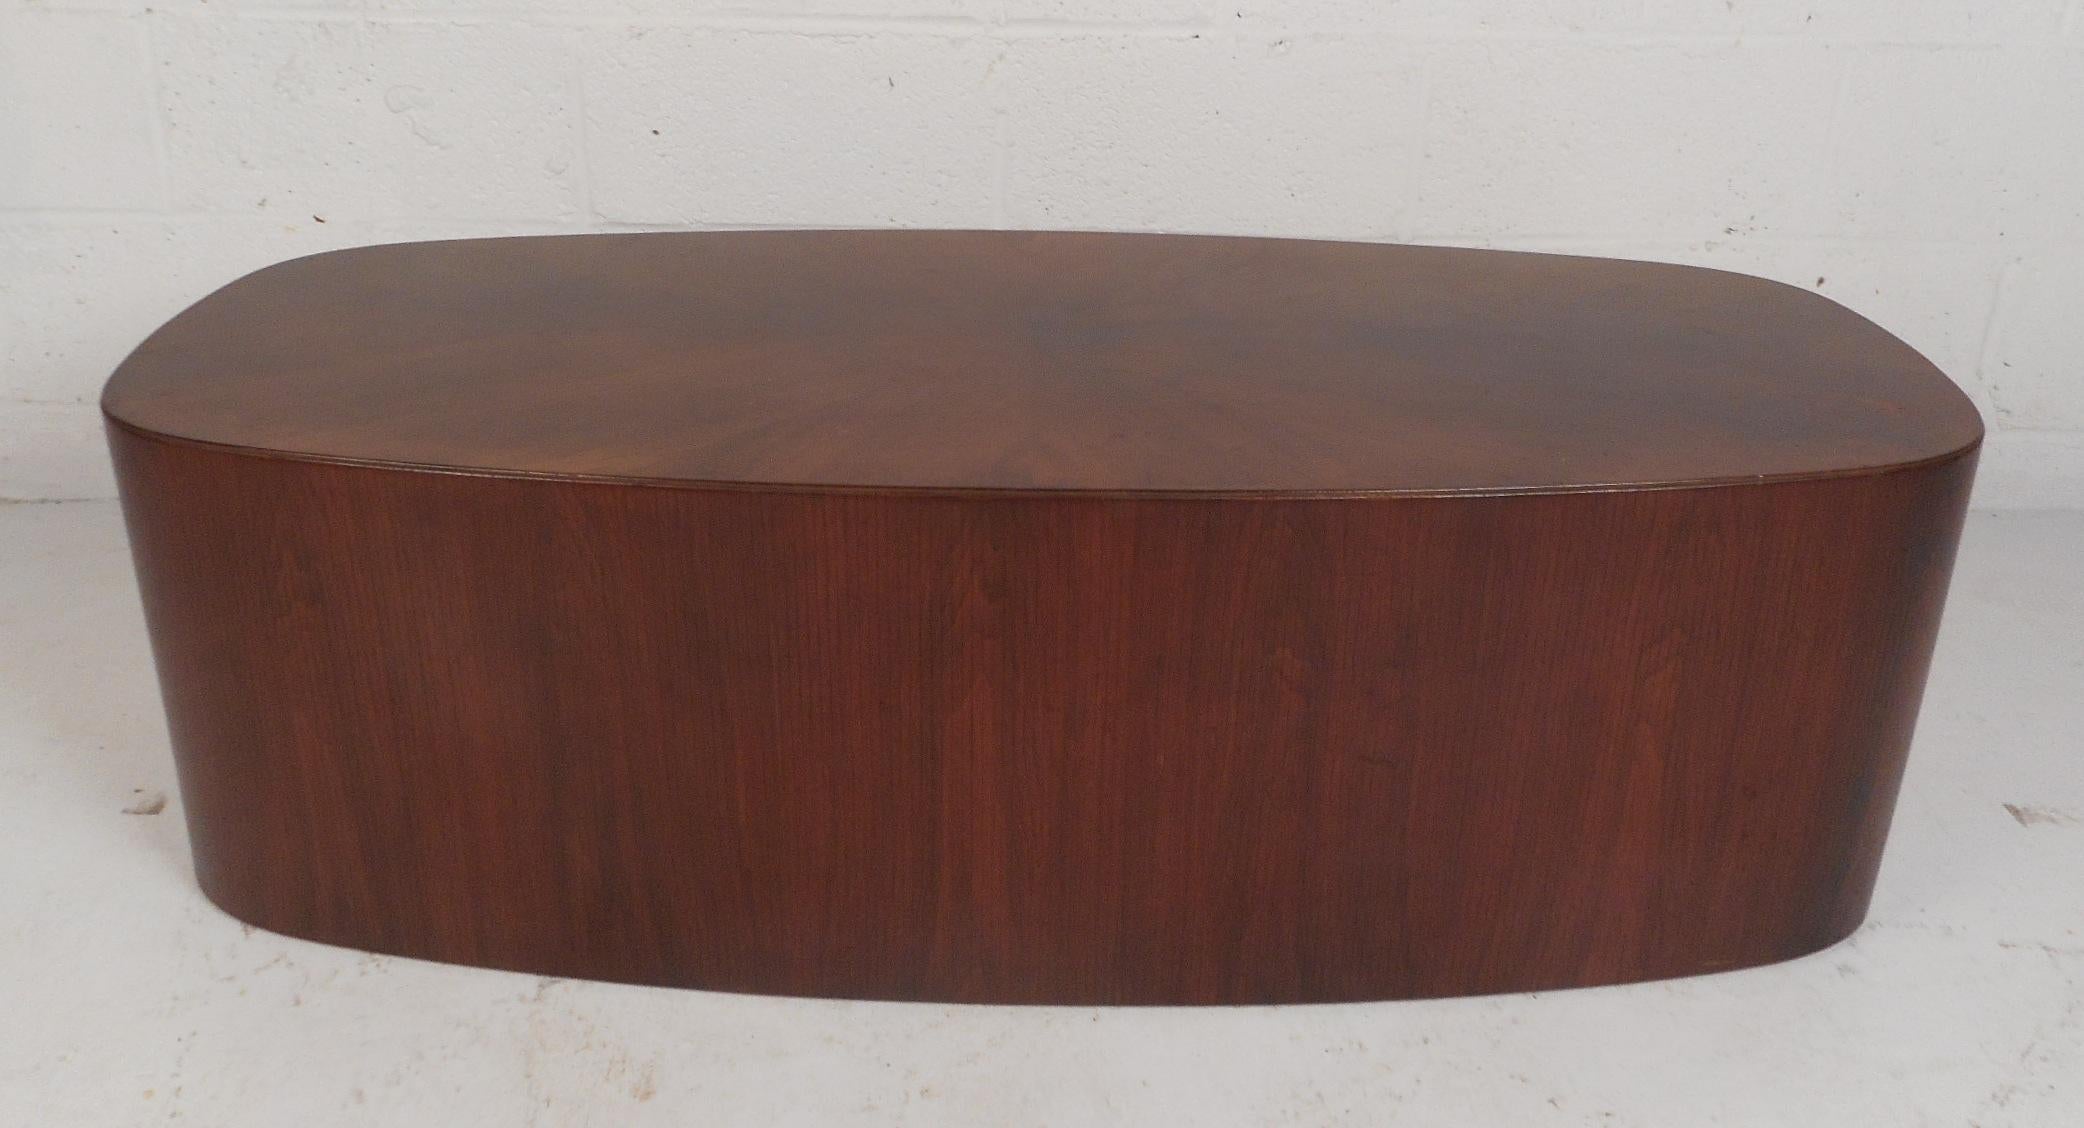 This beautiful vintage modern coffee table features unique wood grain on the top running in different directions. An oval shape, smooth edges, and a wonderful dark walnut finish adds to the allure. This stunning coffee table makes the perfect